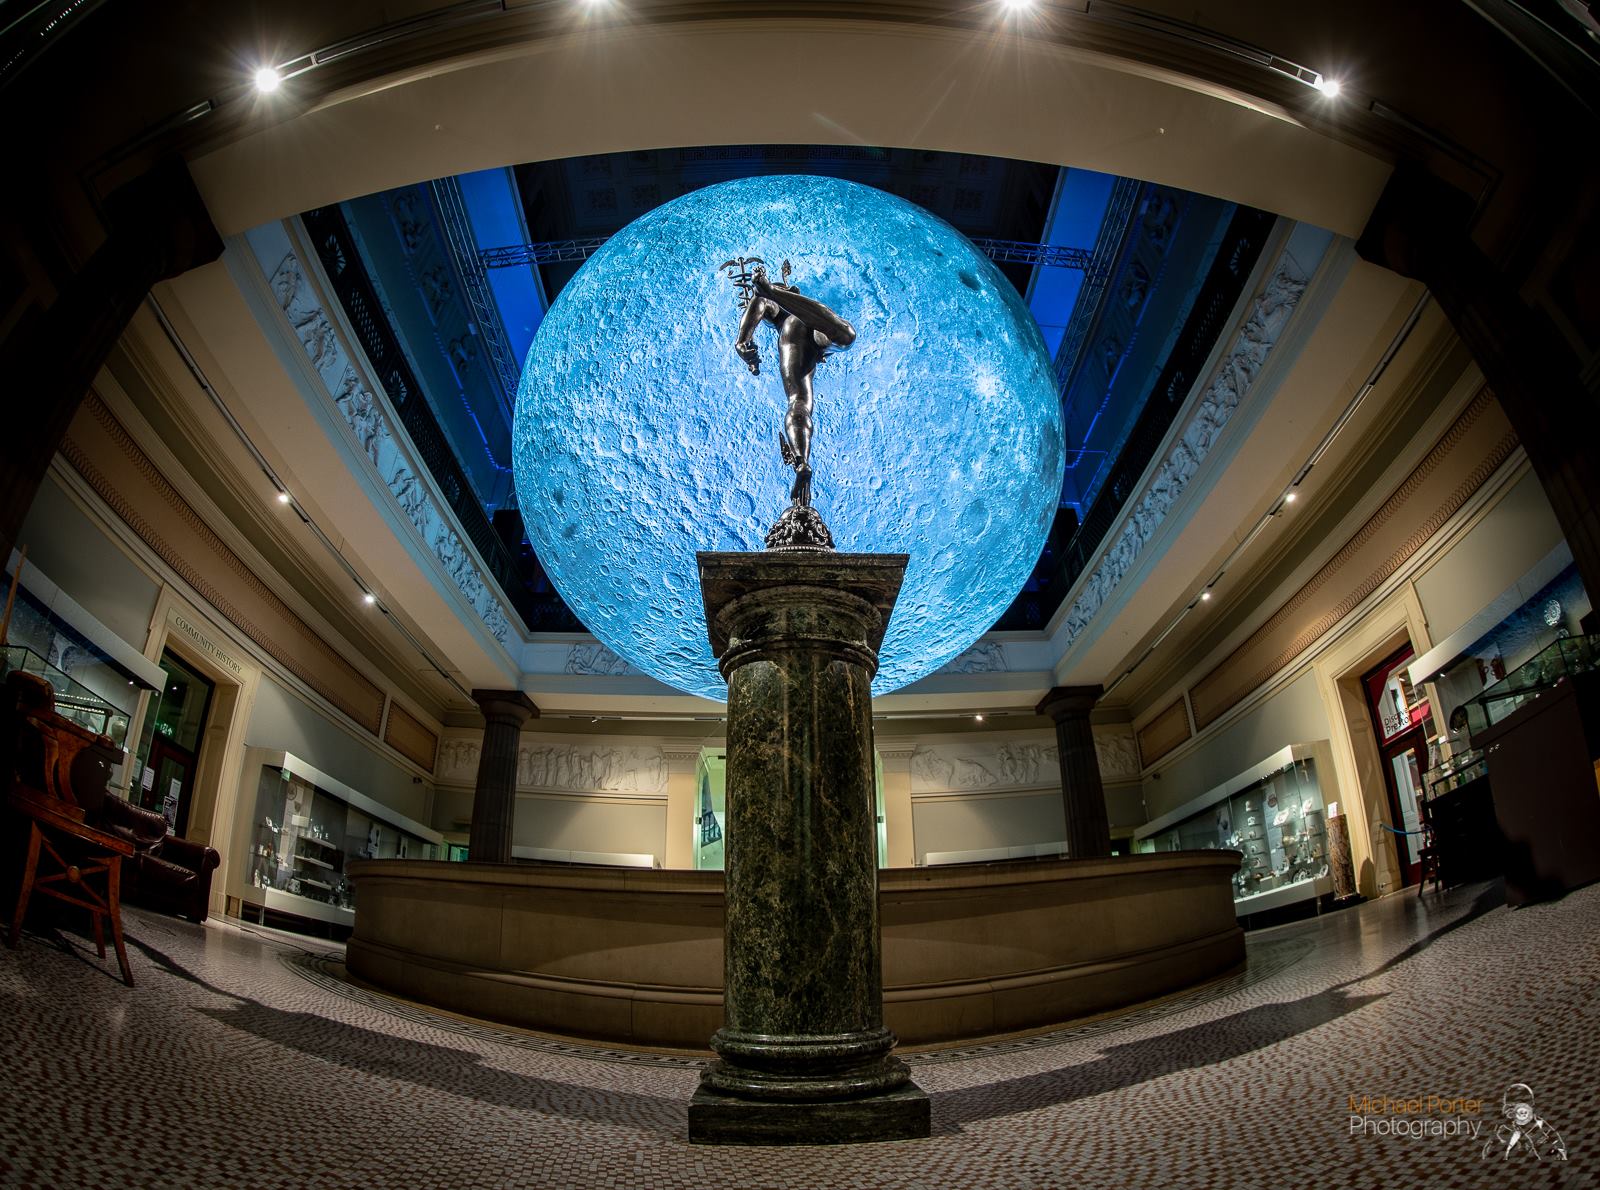 A large moon hangs suspended in the Harris' rotunda space.